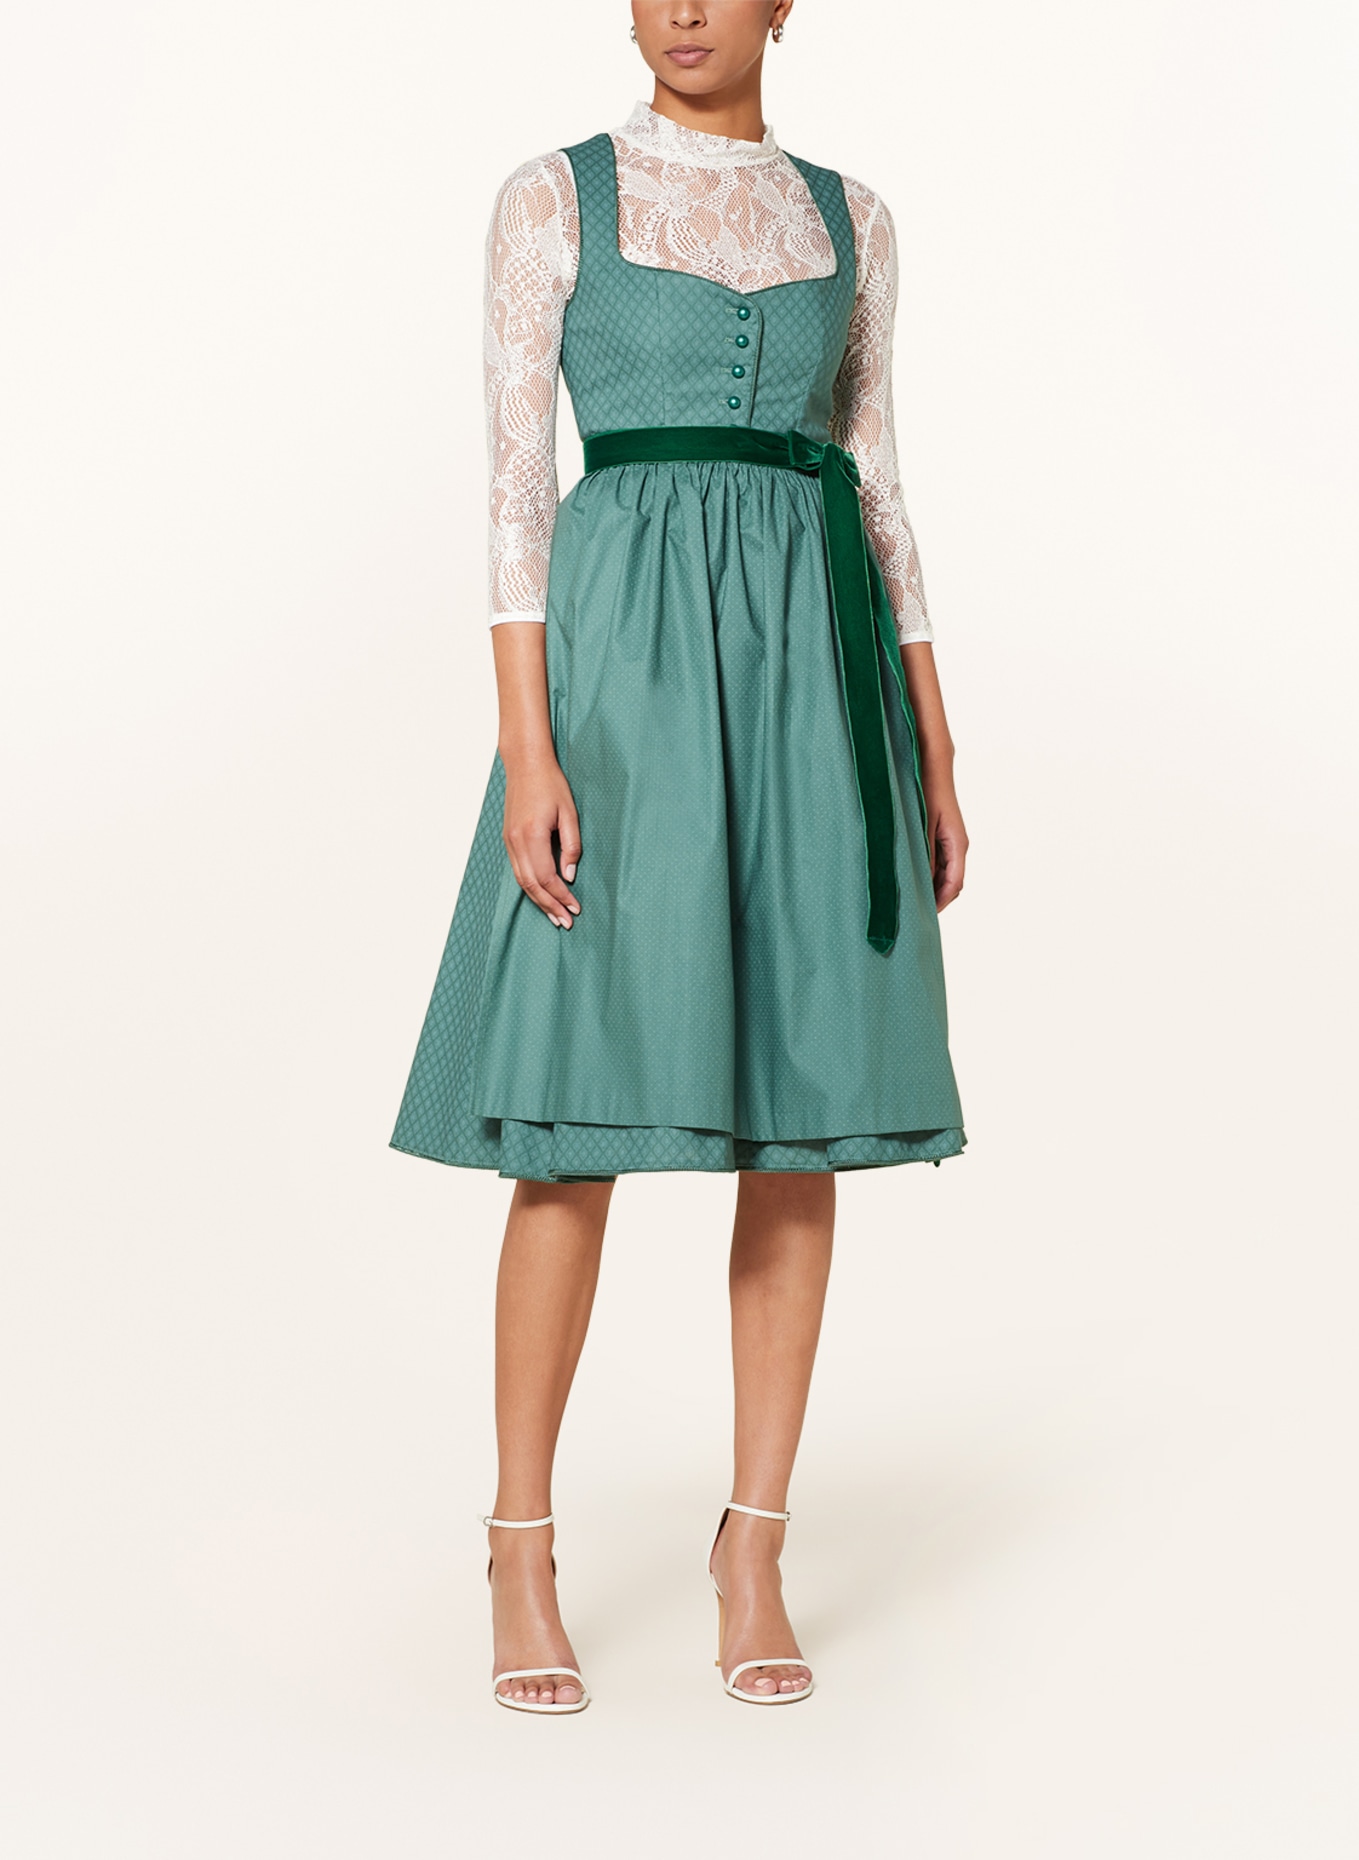 KINGA MATHE Dirndl blouse LINA with 3/4 sleeves and lace, Color: ECRU (Image 4)